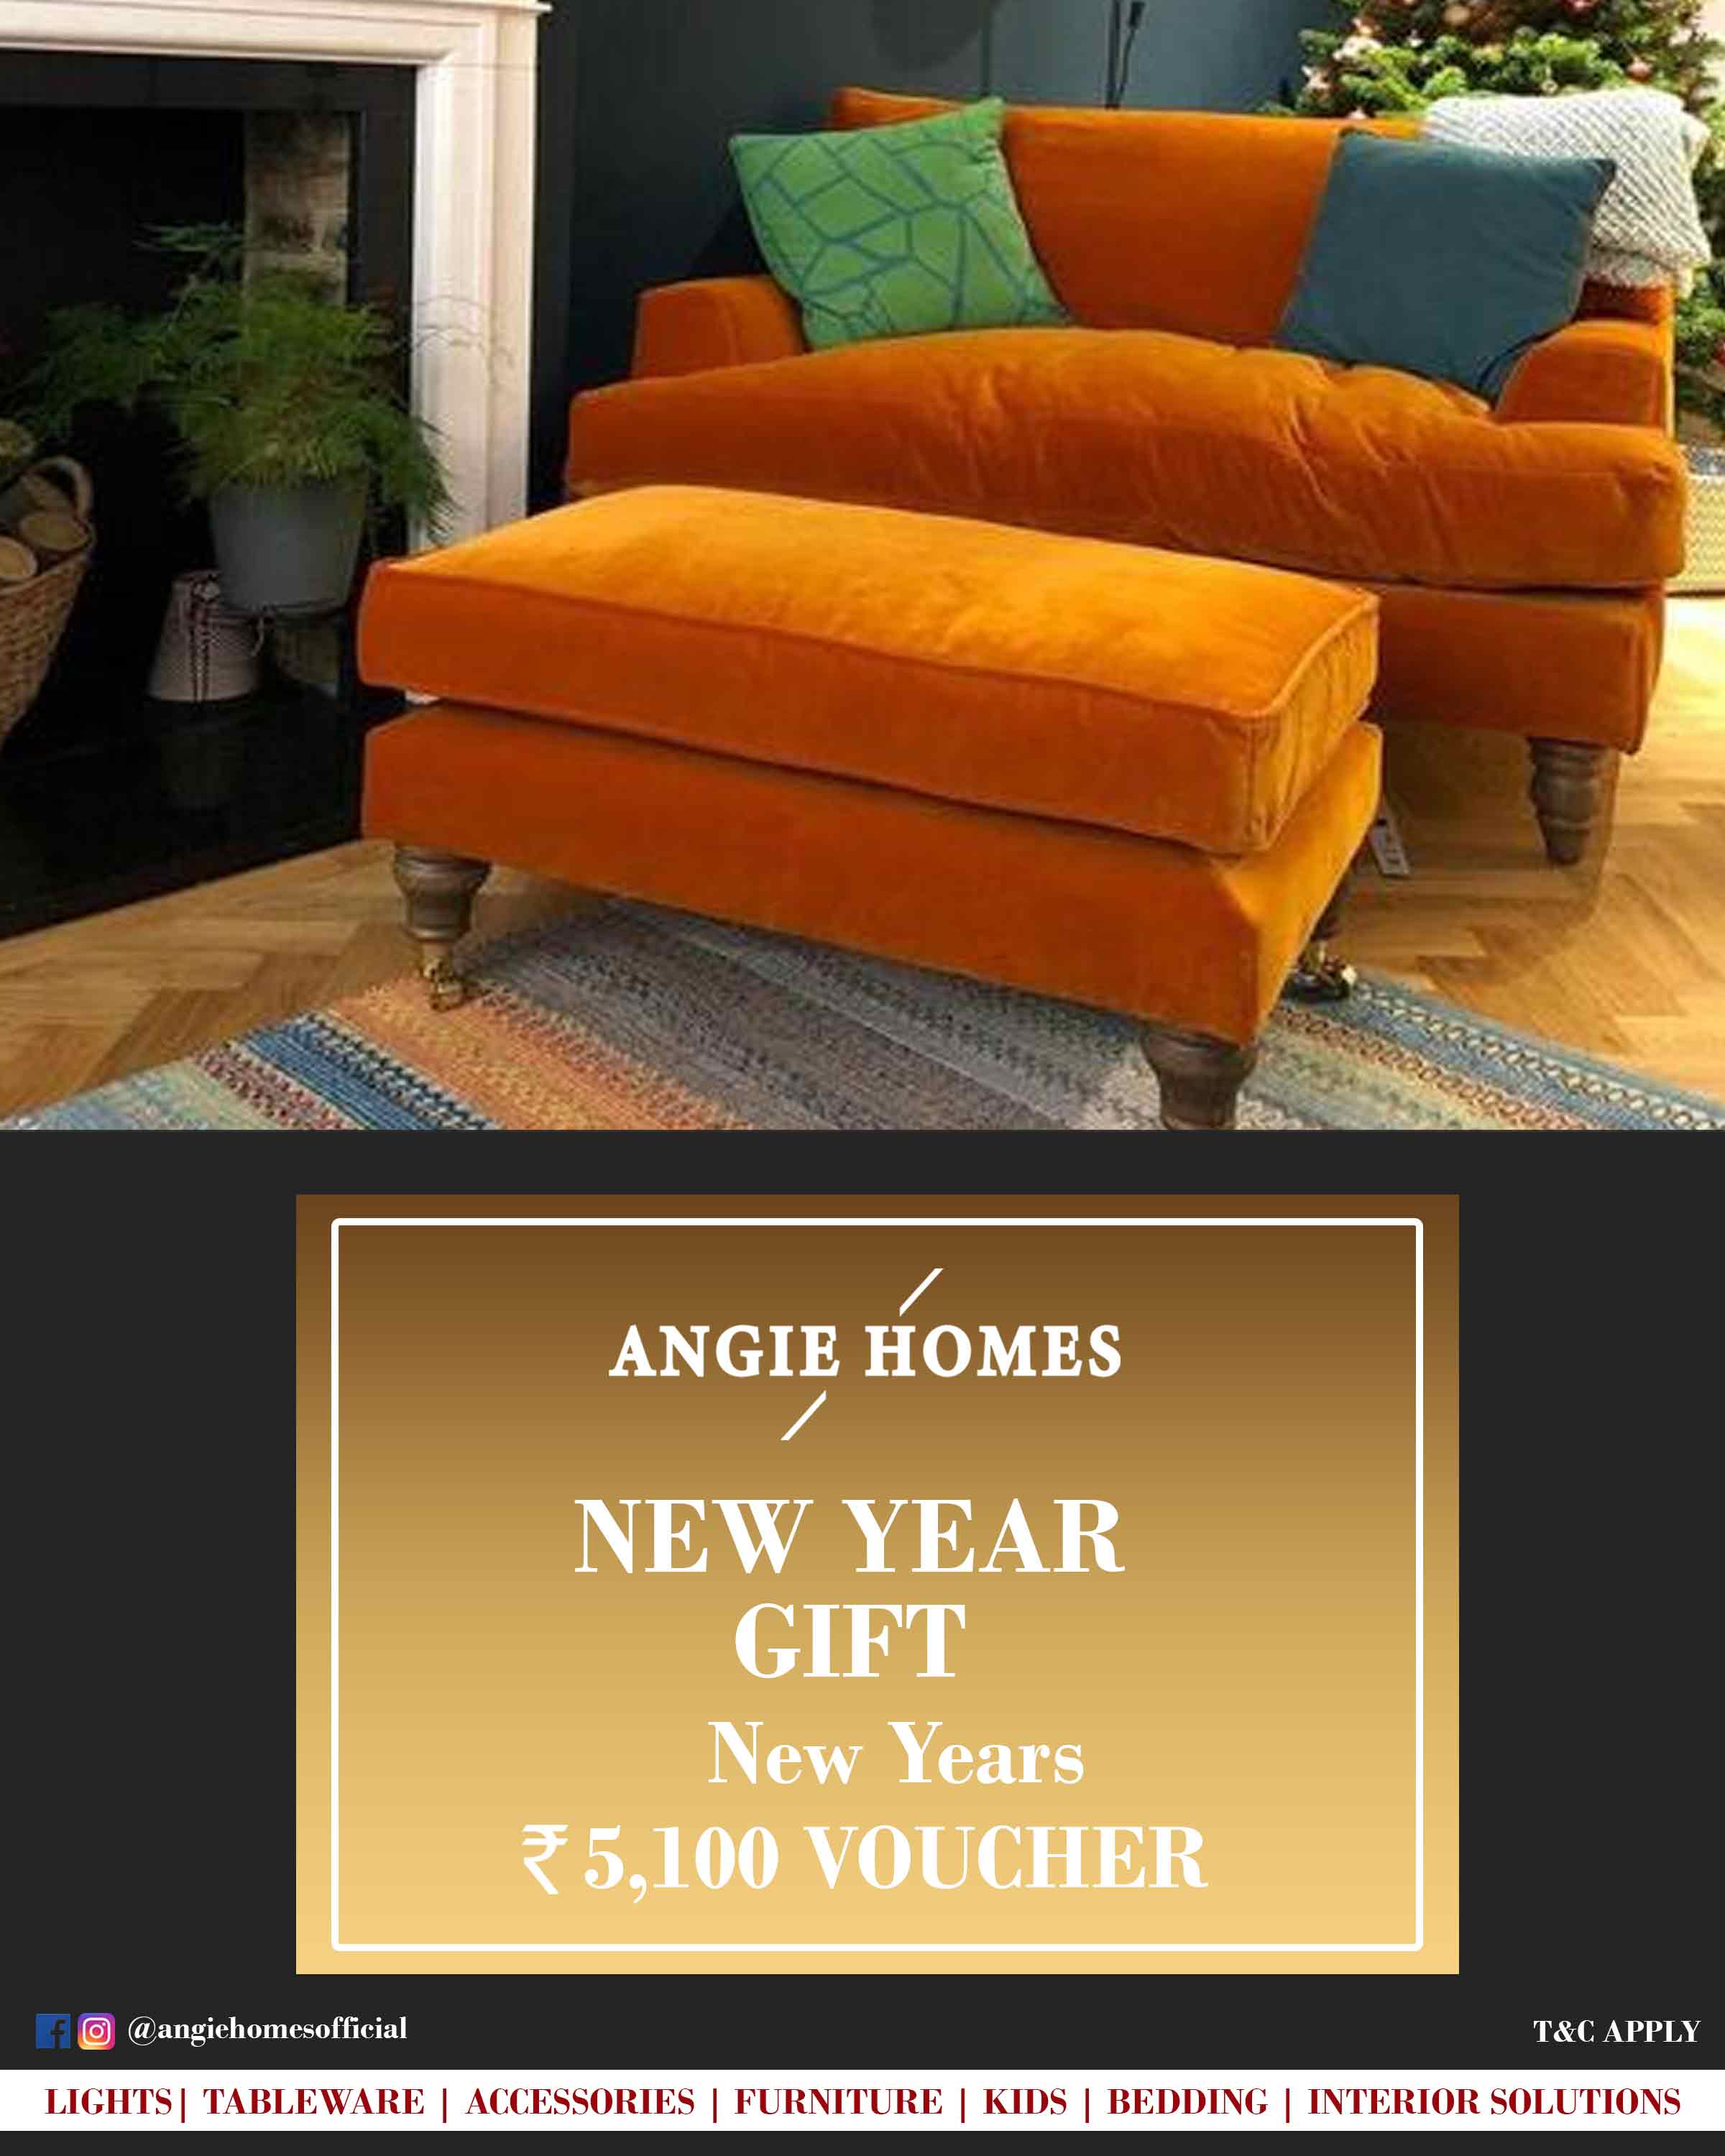 Online New Year Gift Card Voucher for Orange Luxury Sofa | Furniture ANGIE HOMES